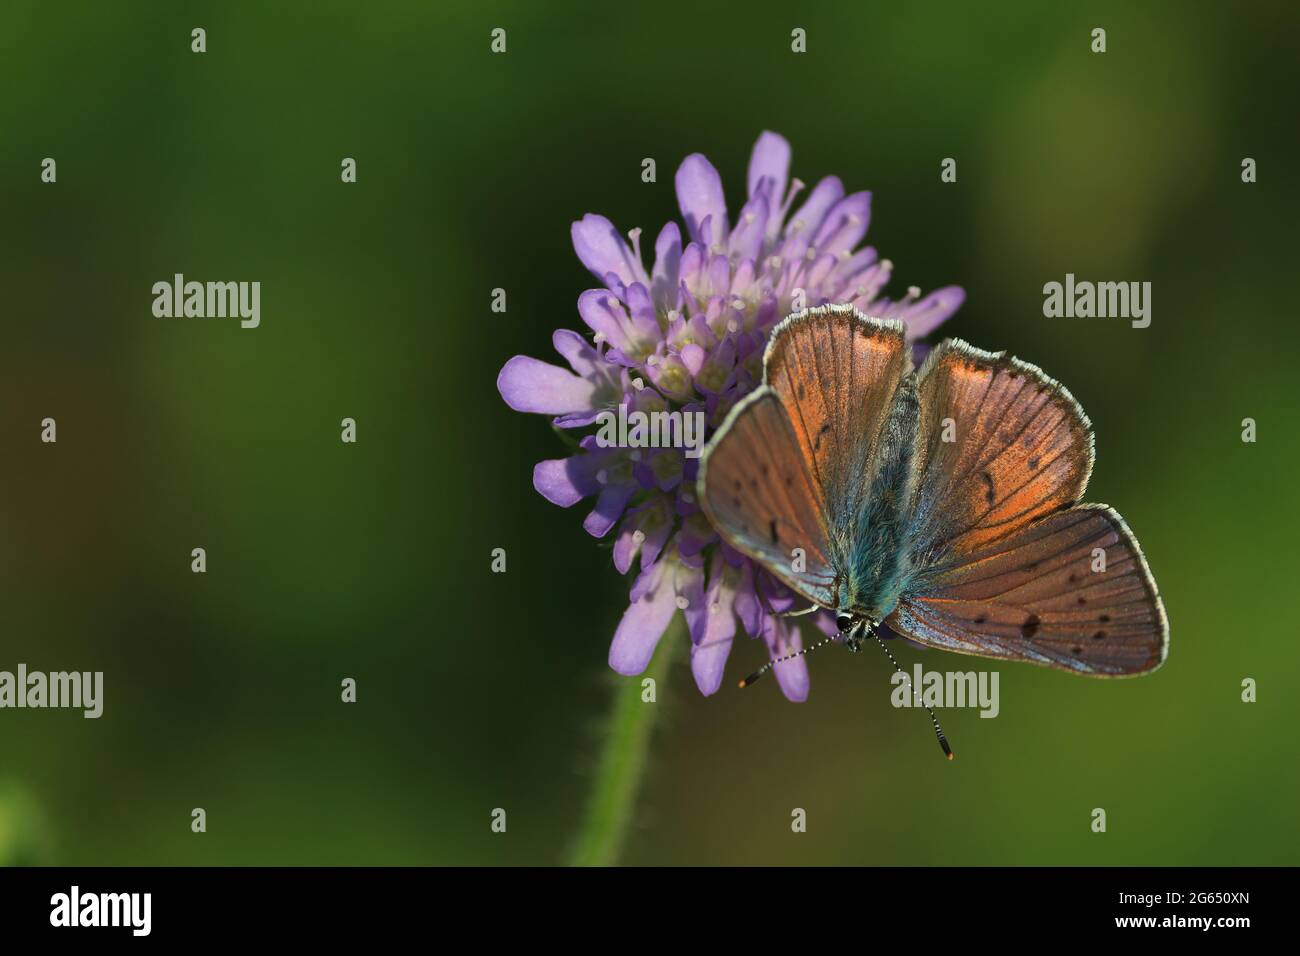 Butterfly flower. Lycaena alciphron, Purple-shot Copper.  A copper-brown butterfly with spread wings sits on a purple flower. Space for text. Stock Photo